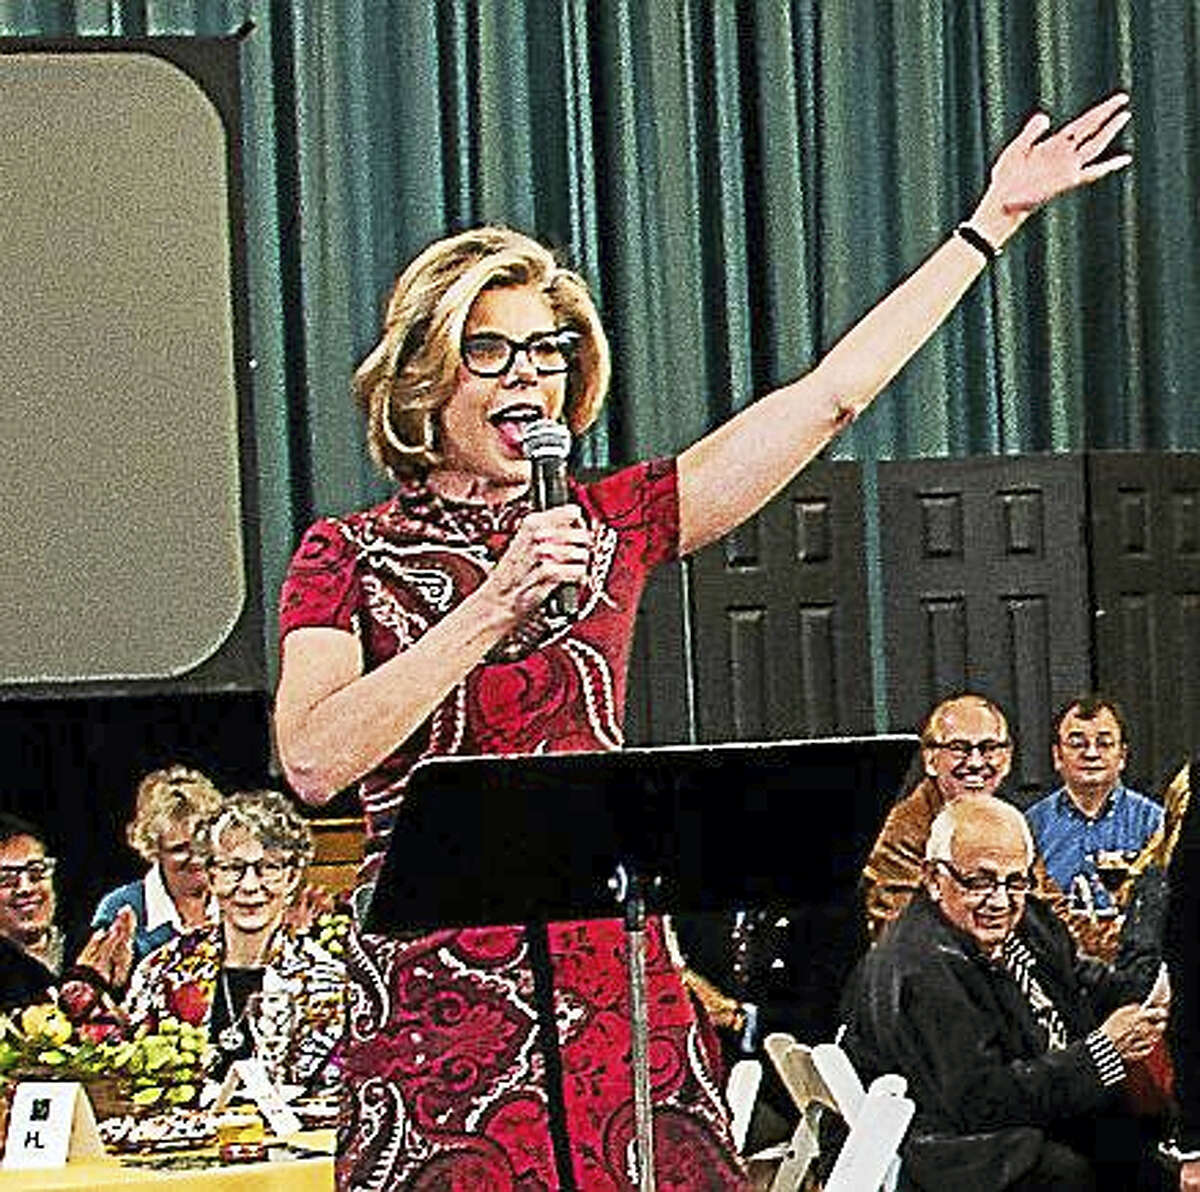 Christine Baranski, HVA Board member and costar of CBS’s “The Good Wife,” charms the auction crowd singing to Diane von Furstenberg.